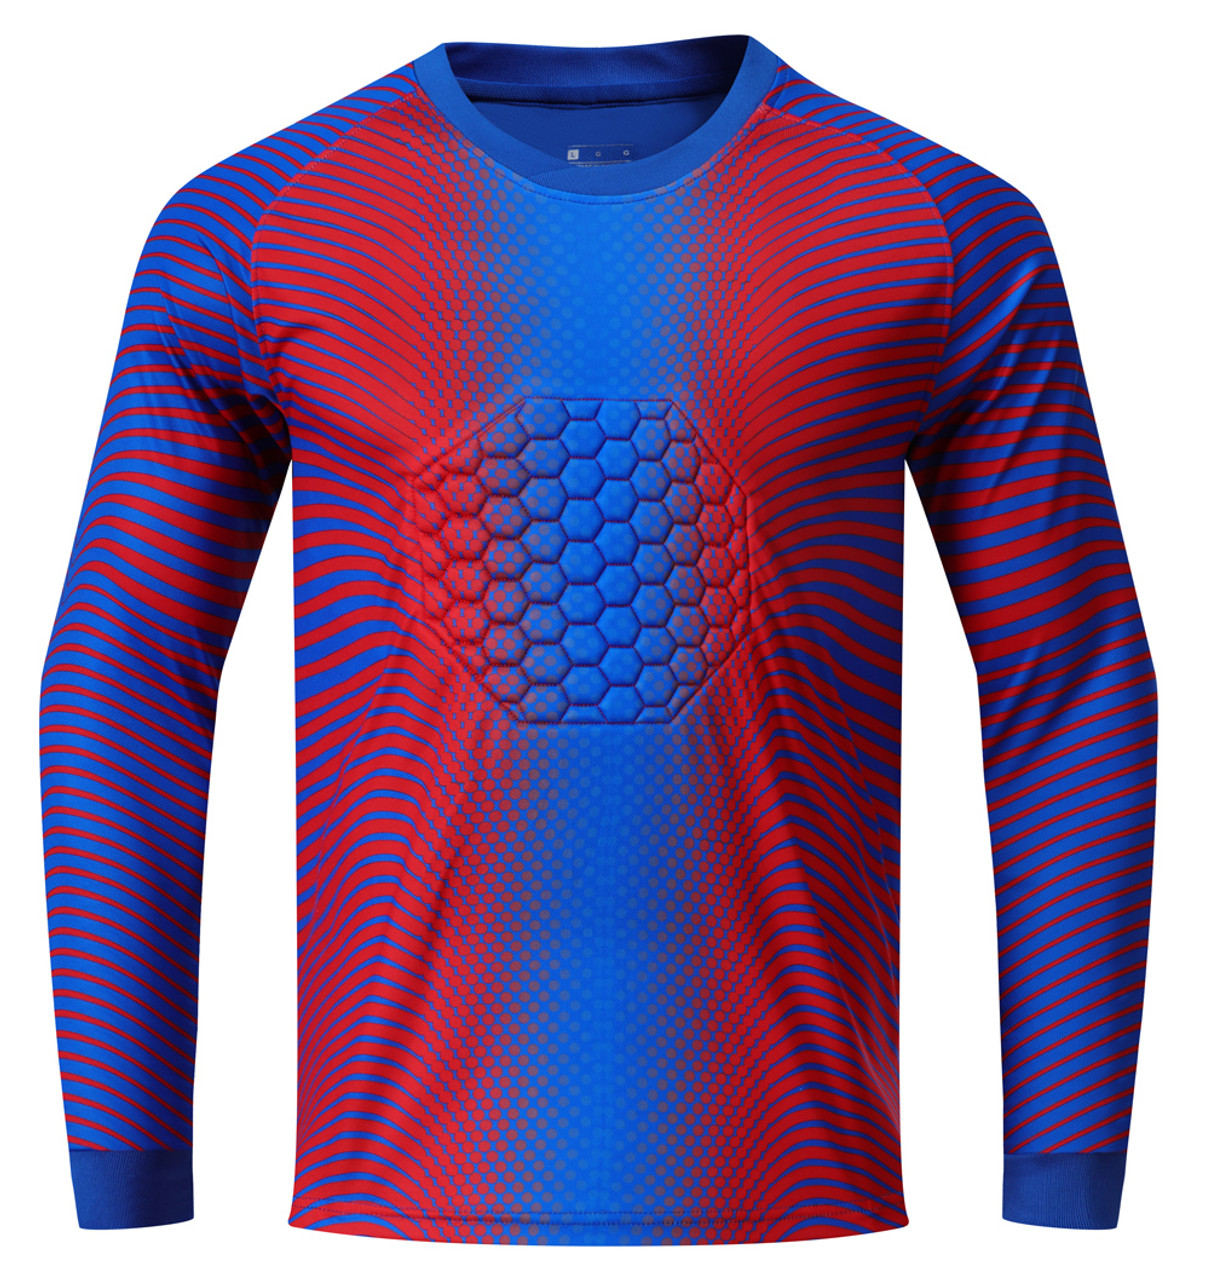  Yeahdor Kids Boy Football Training Uniform Goalie Jersey  Stylish Print Short Sleeve Soccer T-Shirt with Shorts Outfit: Clothing,  Shoes 